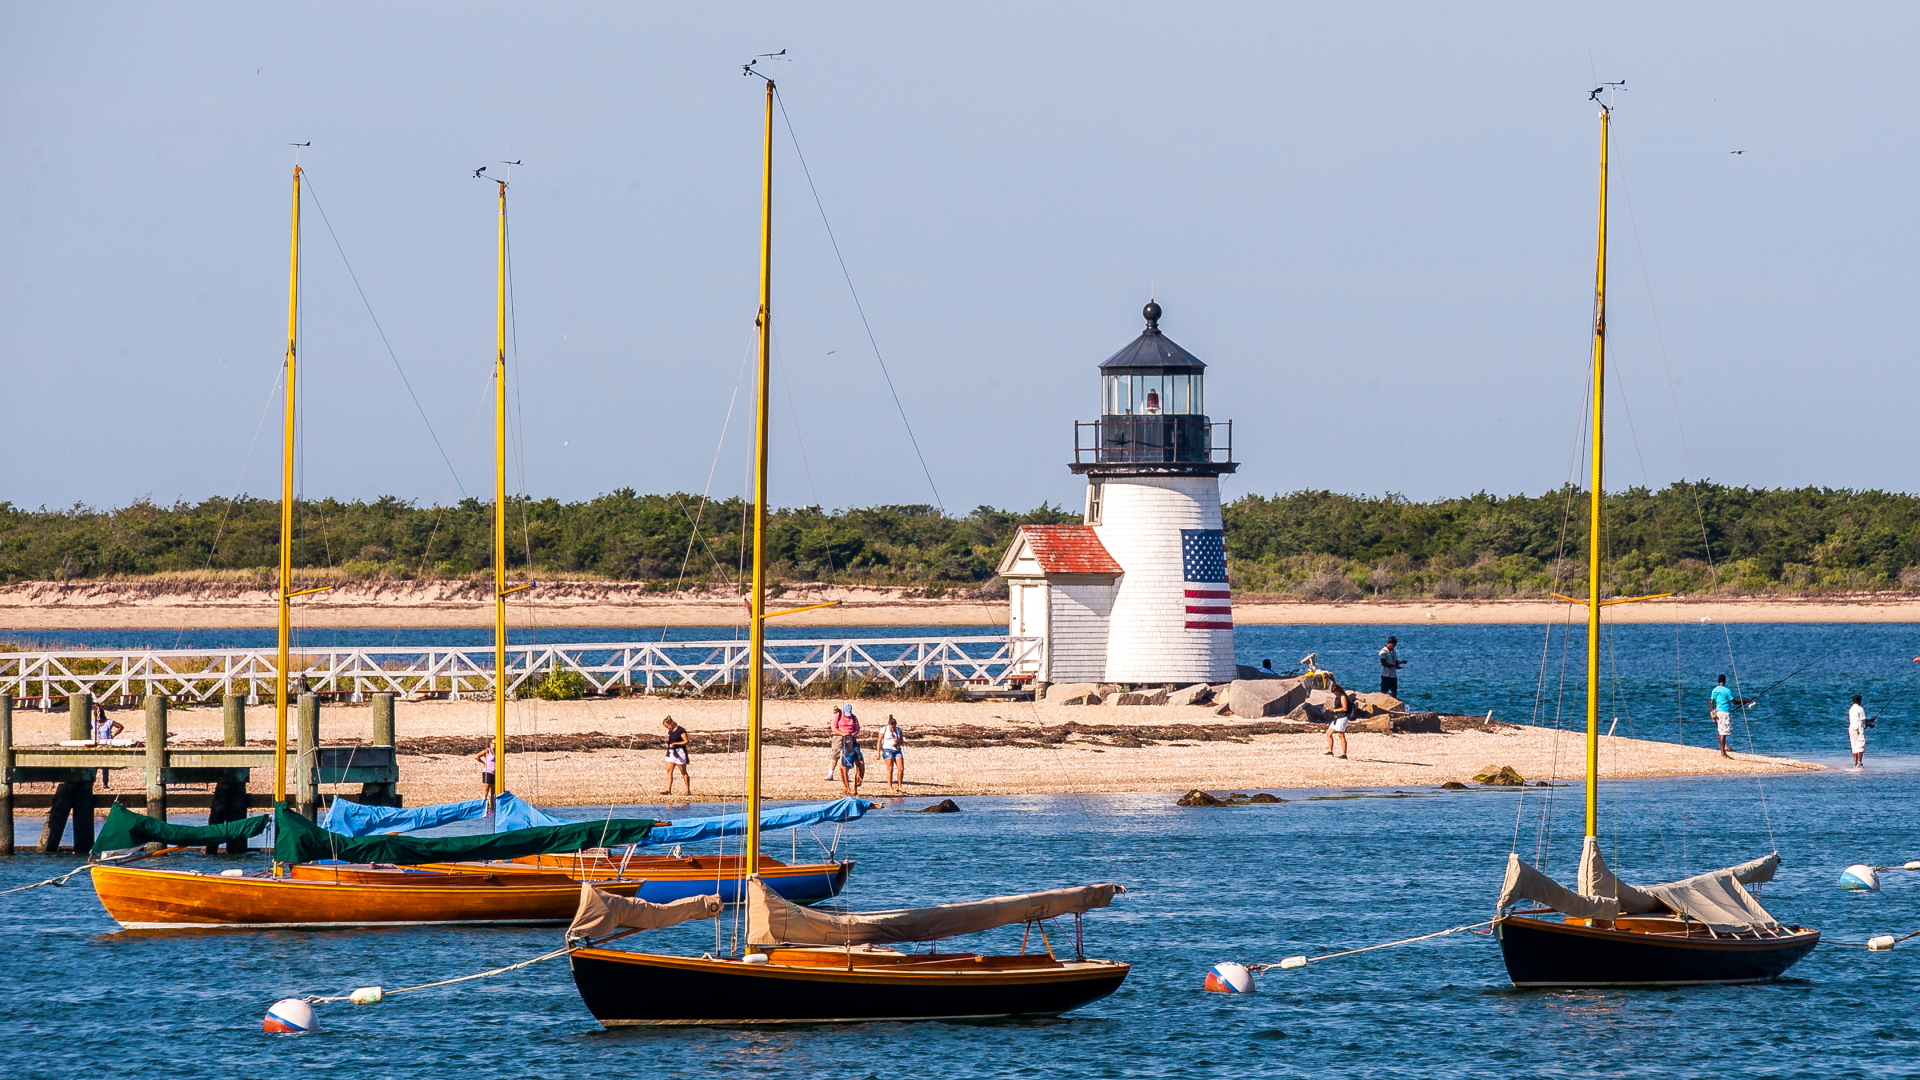 Lighthouse on Nantucket and boats floating in the water